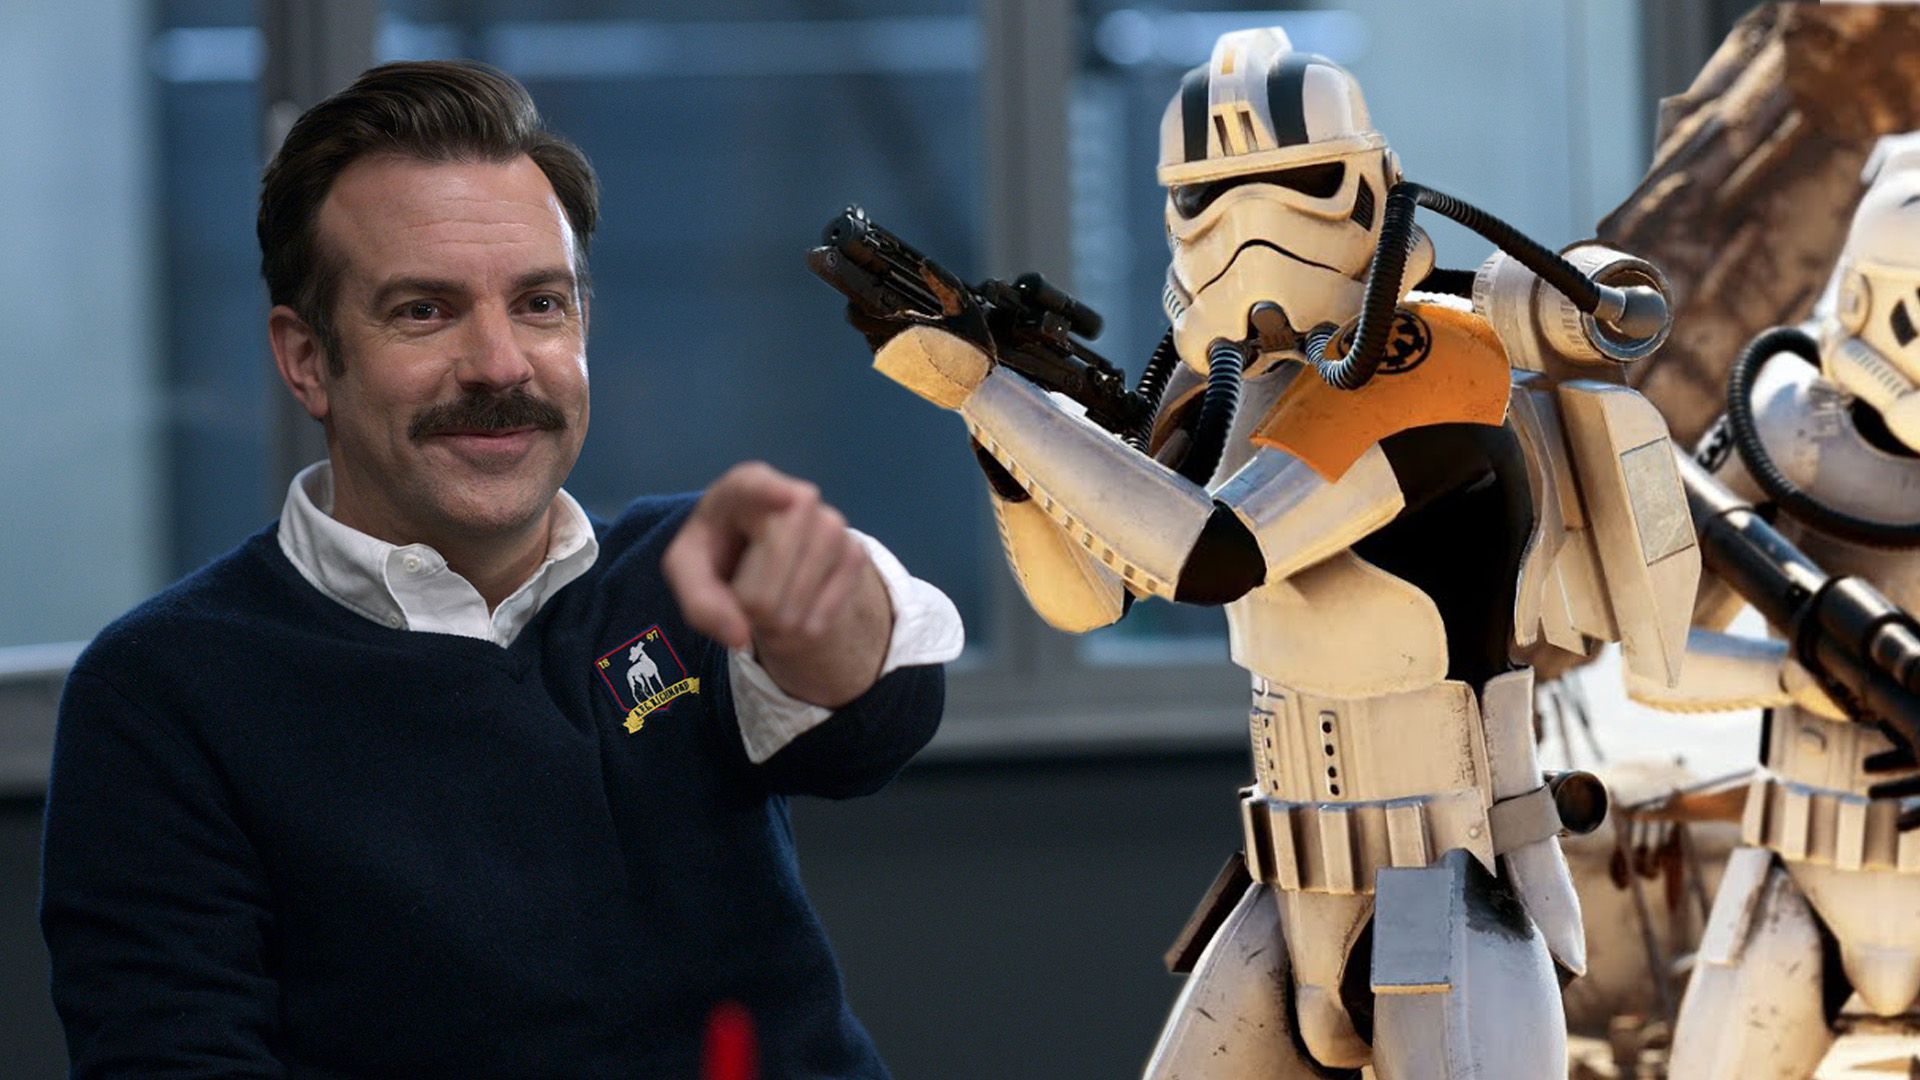 Ted Lasso Season 3 Subtle Callback to Star Wars You Might've Missed